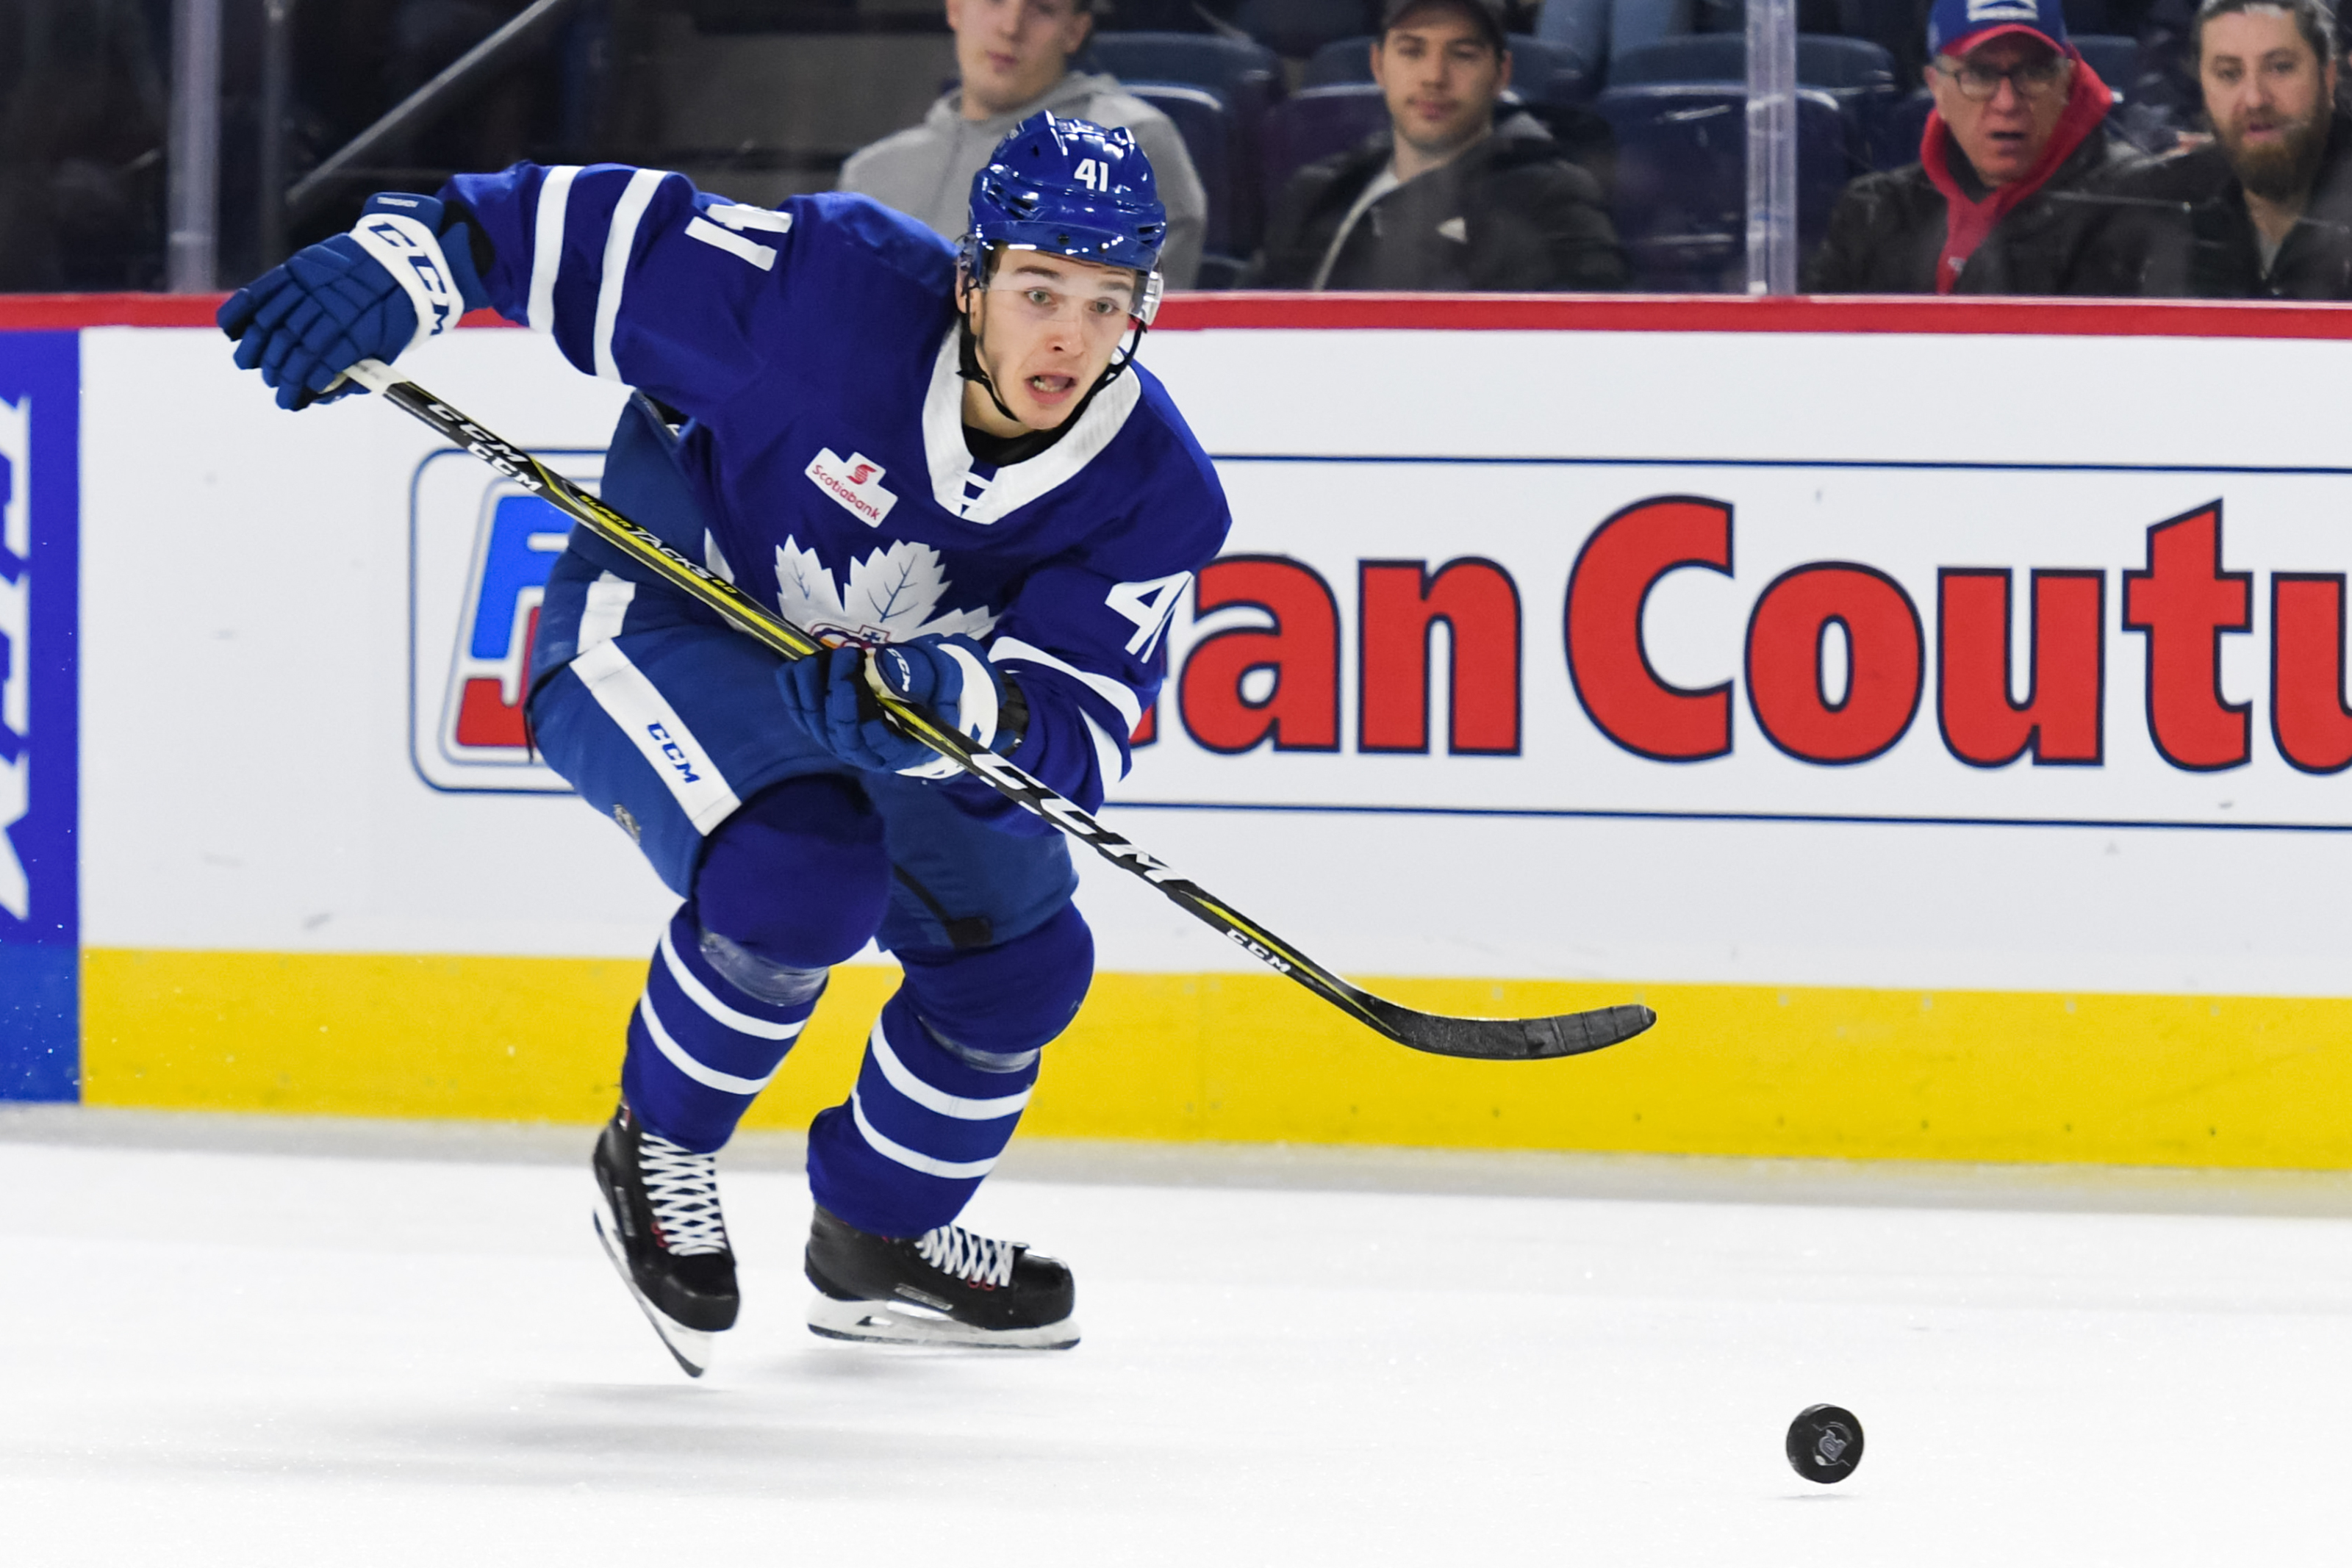 Toronto Marlies - The Next Gen is taking over and we're